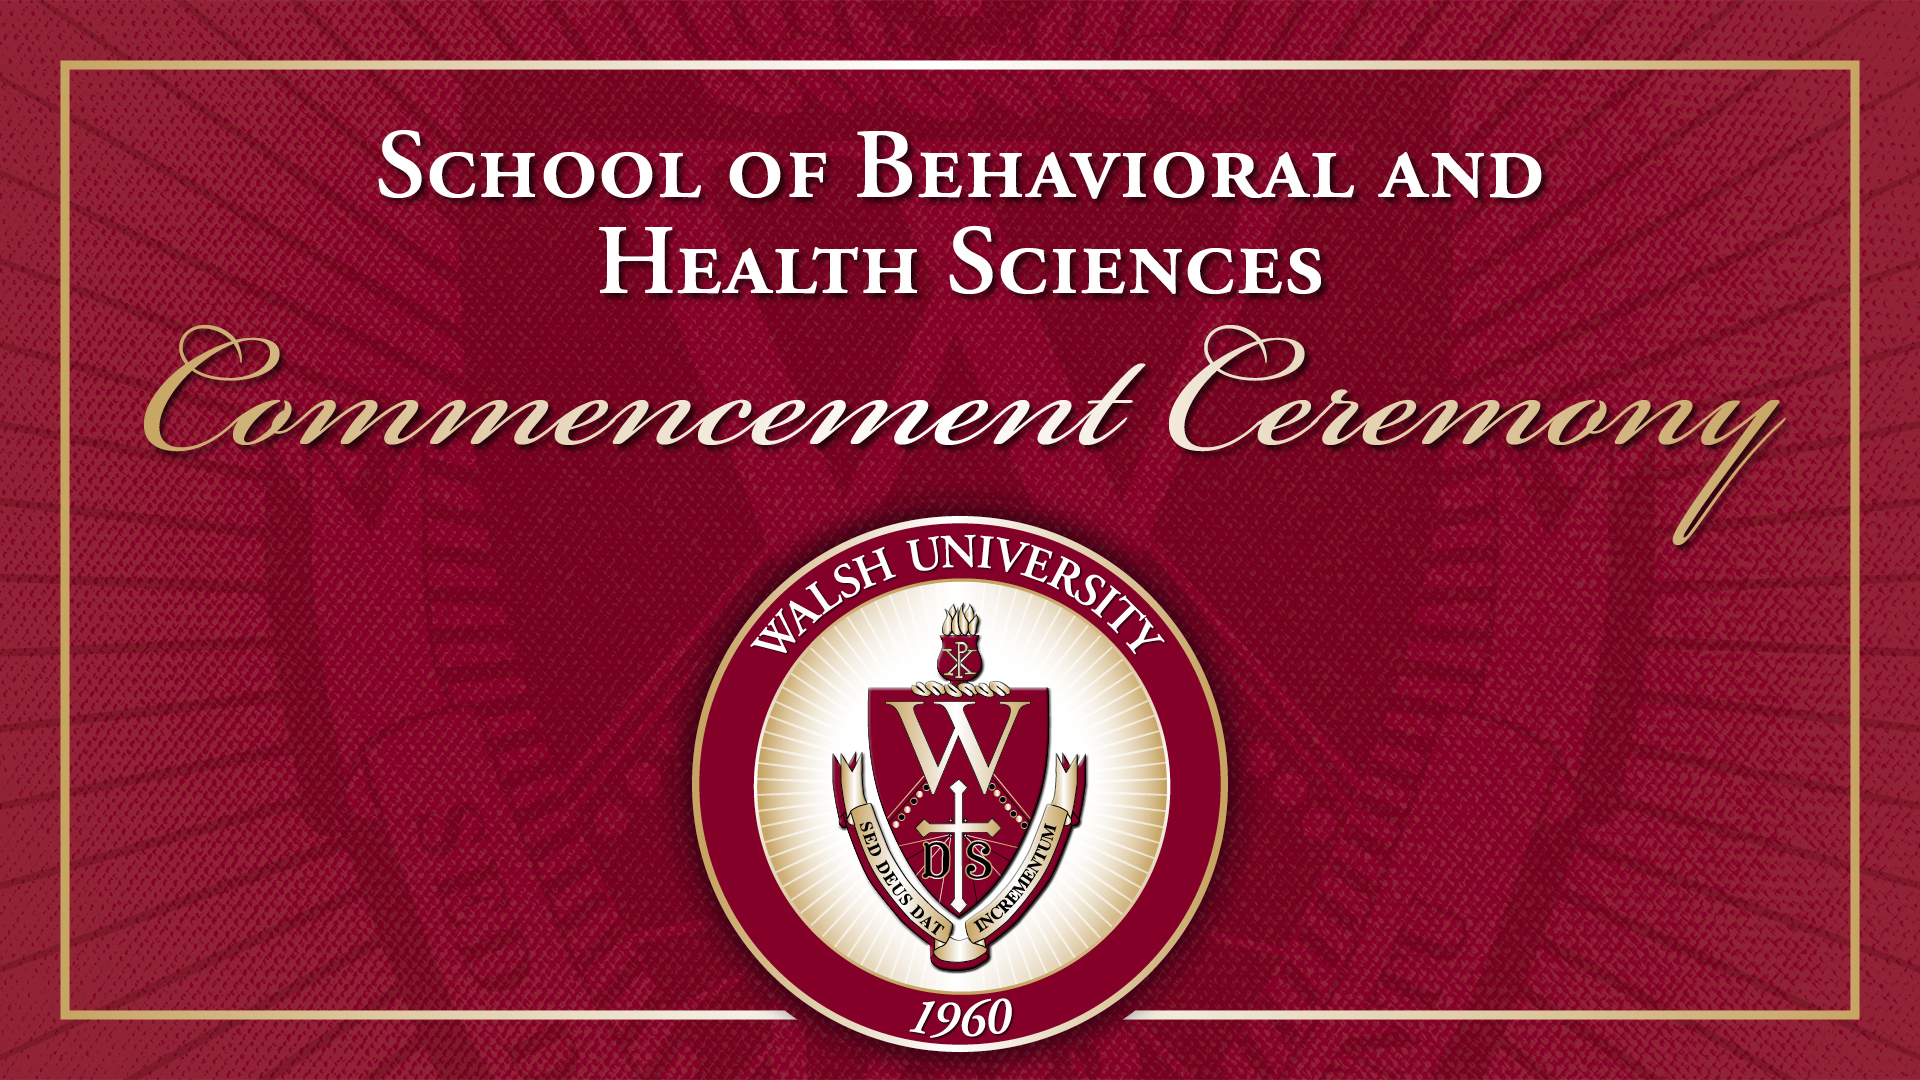 Behavioral and Health Sciences